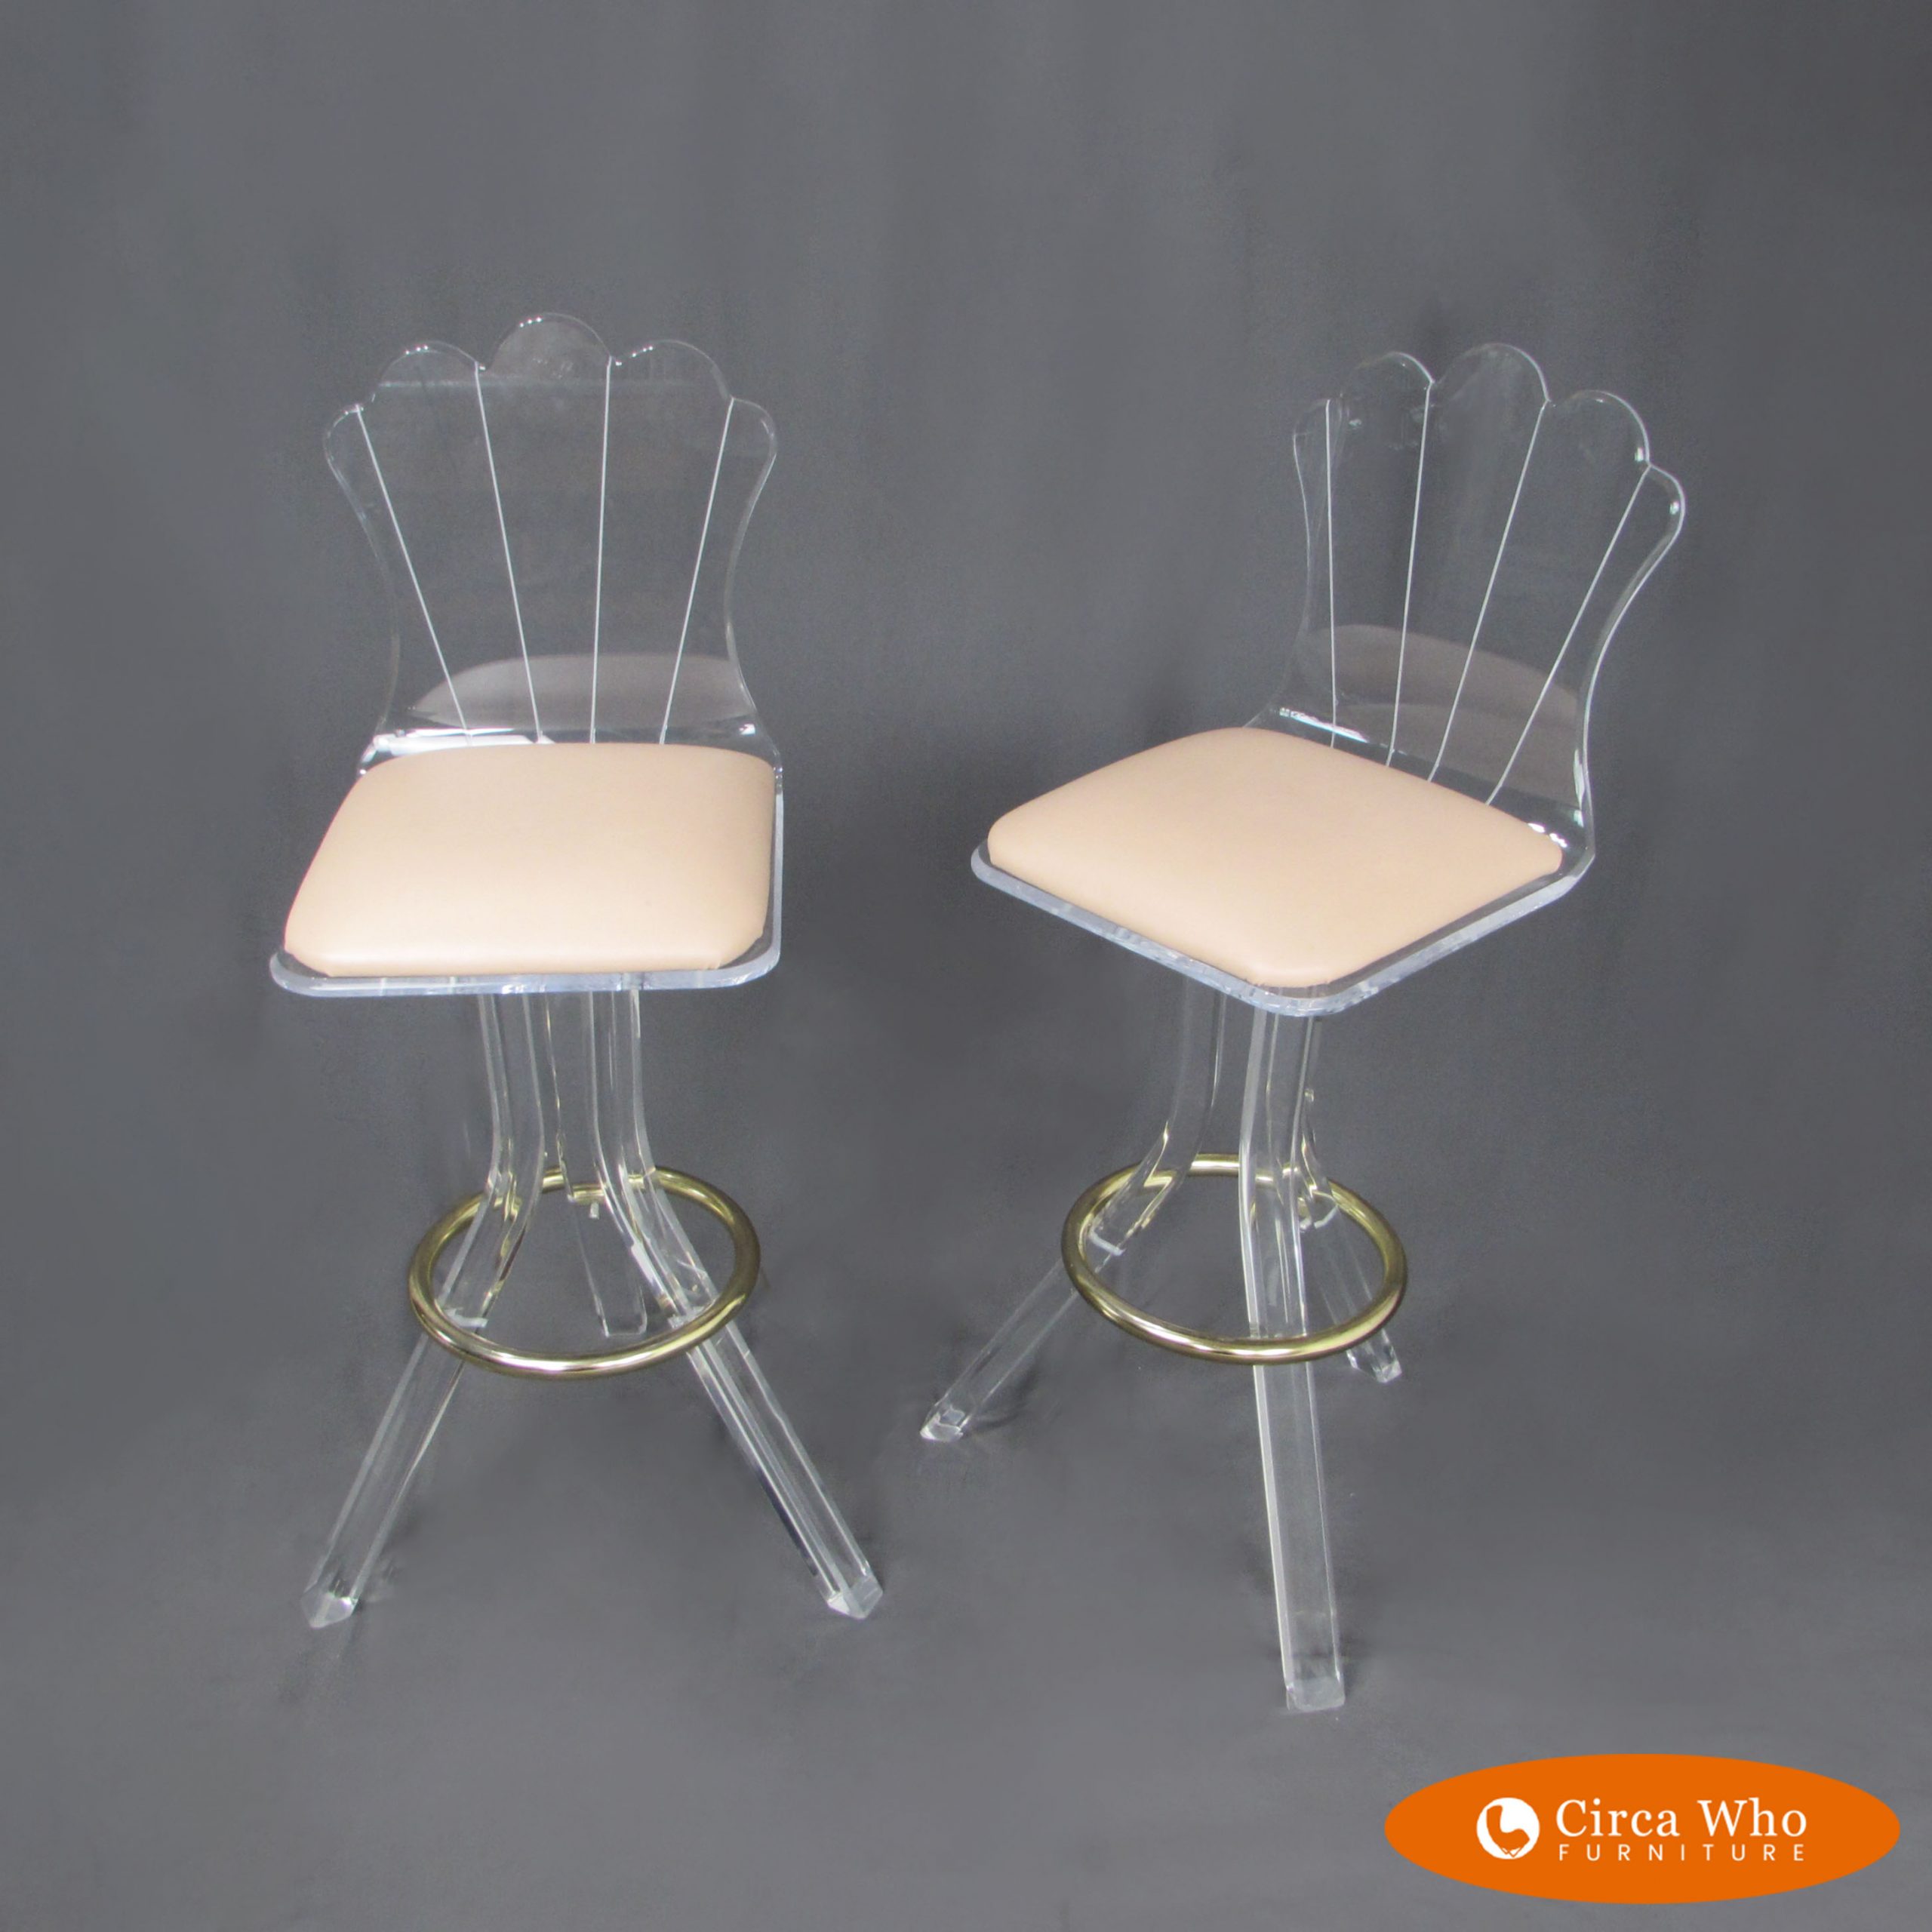 Pair Of Lucite Scallop Back Bar Stools, Vintage Lucite Bar Stools